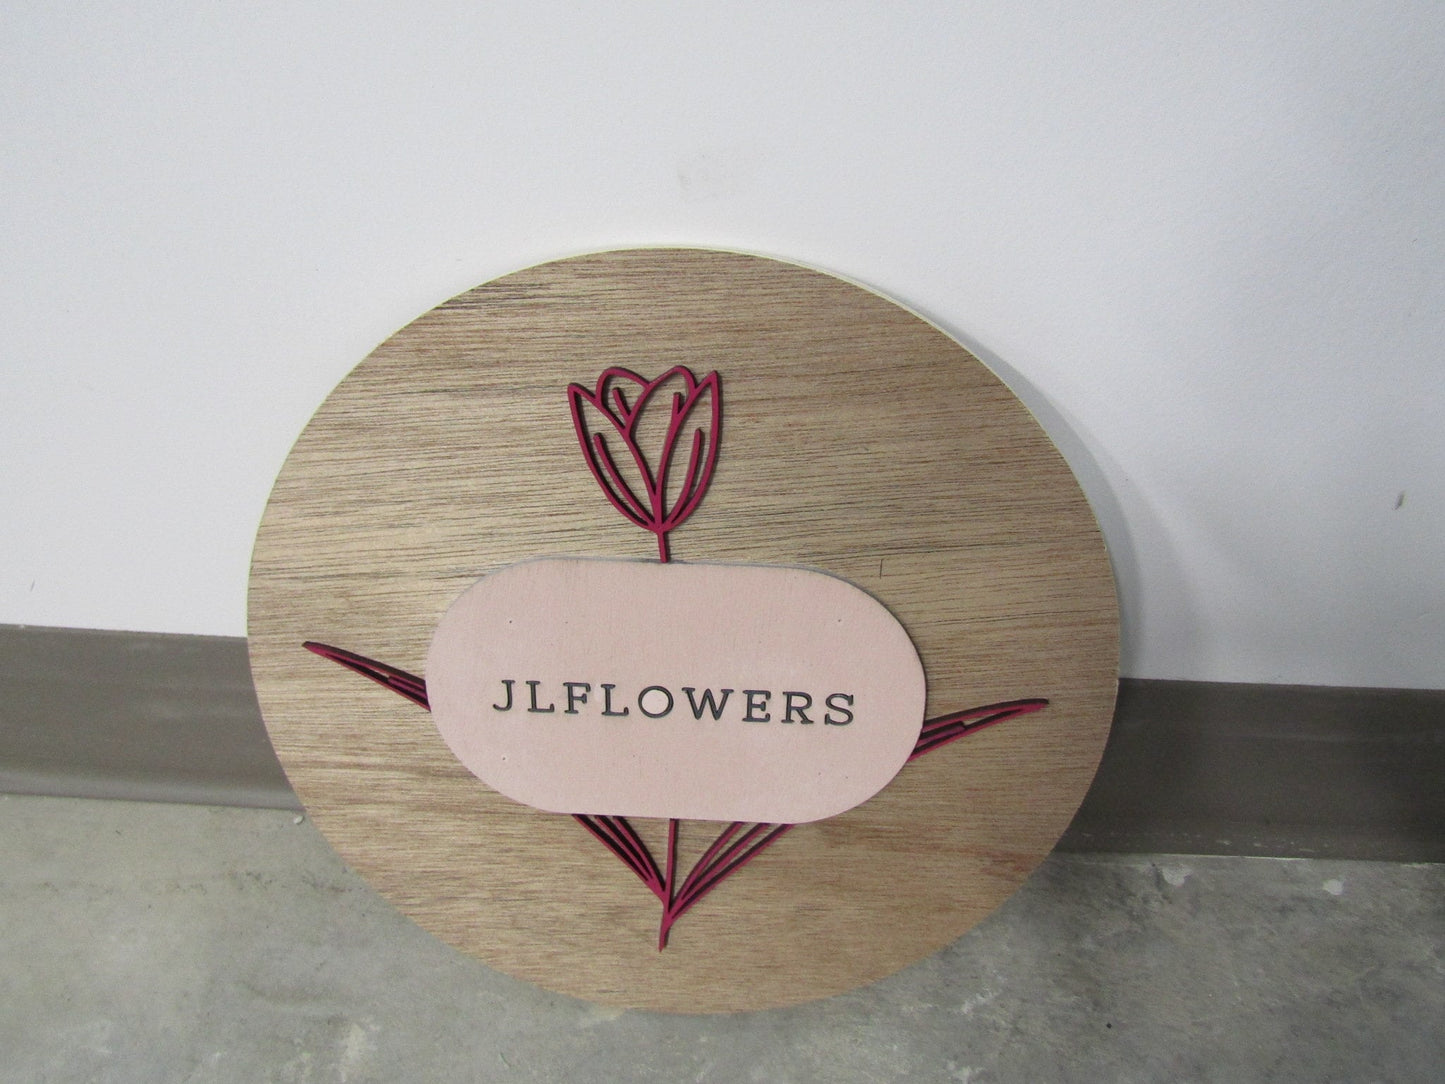 Custom Flower Sign Round Rustic Floral Small Business Booth Vendor Made to Order Logo Circle Wooden Handmade Raised Text Home